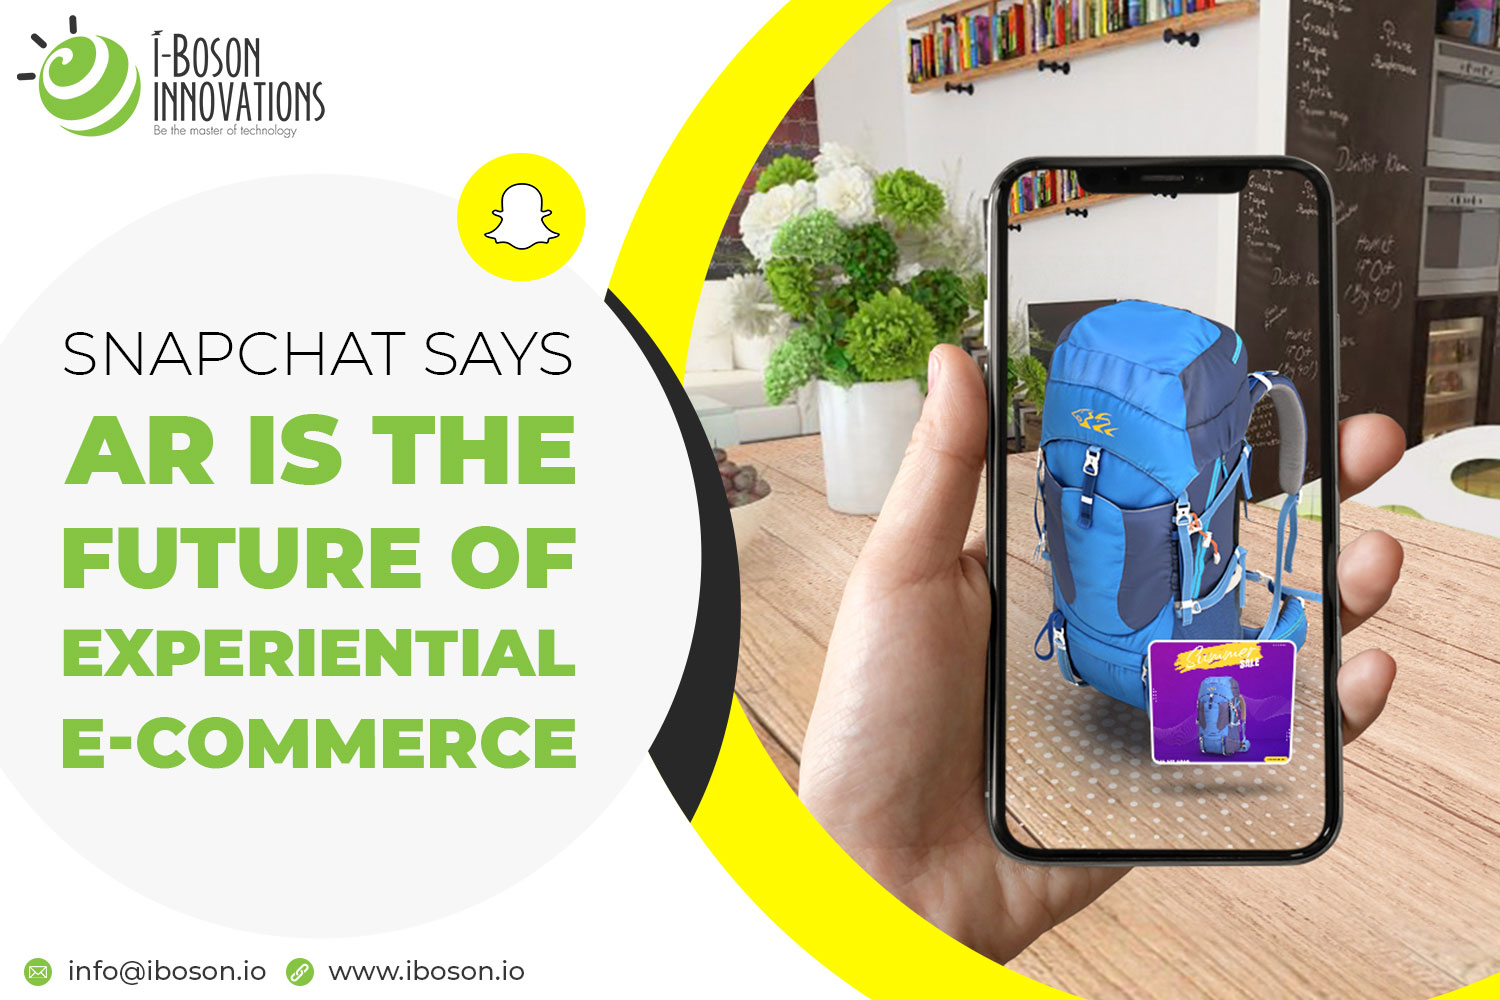 Snapchat bets on augmented reality future in ecommerce
                        